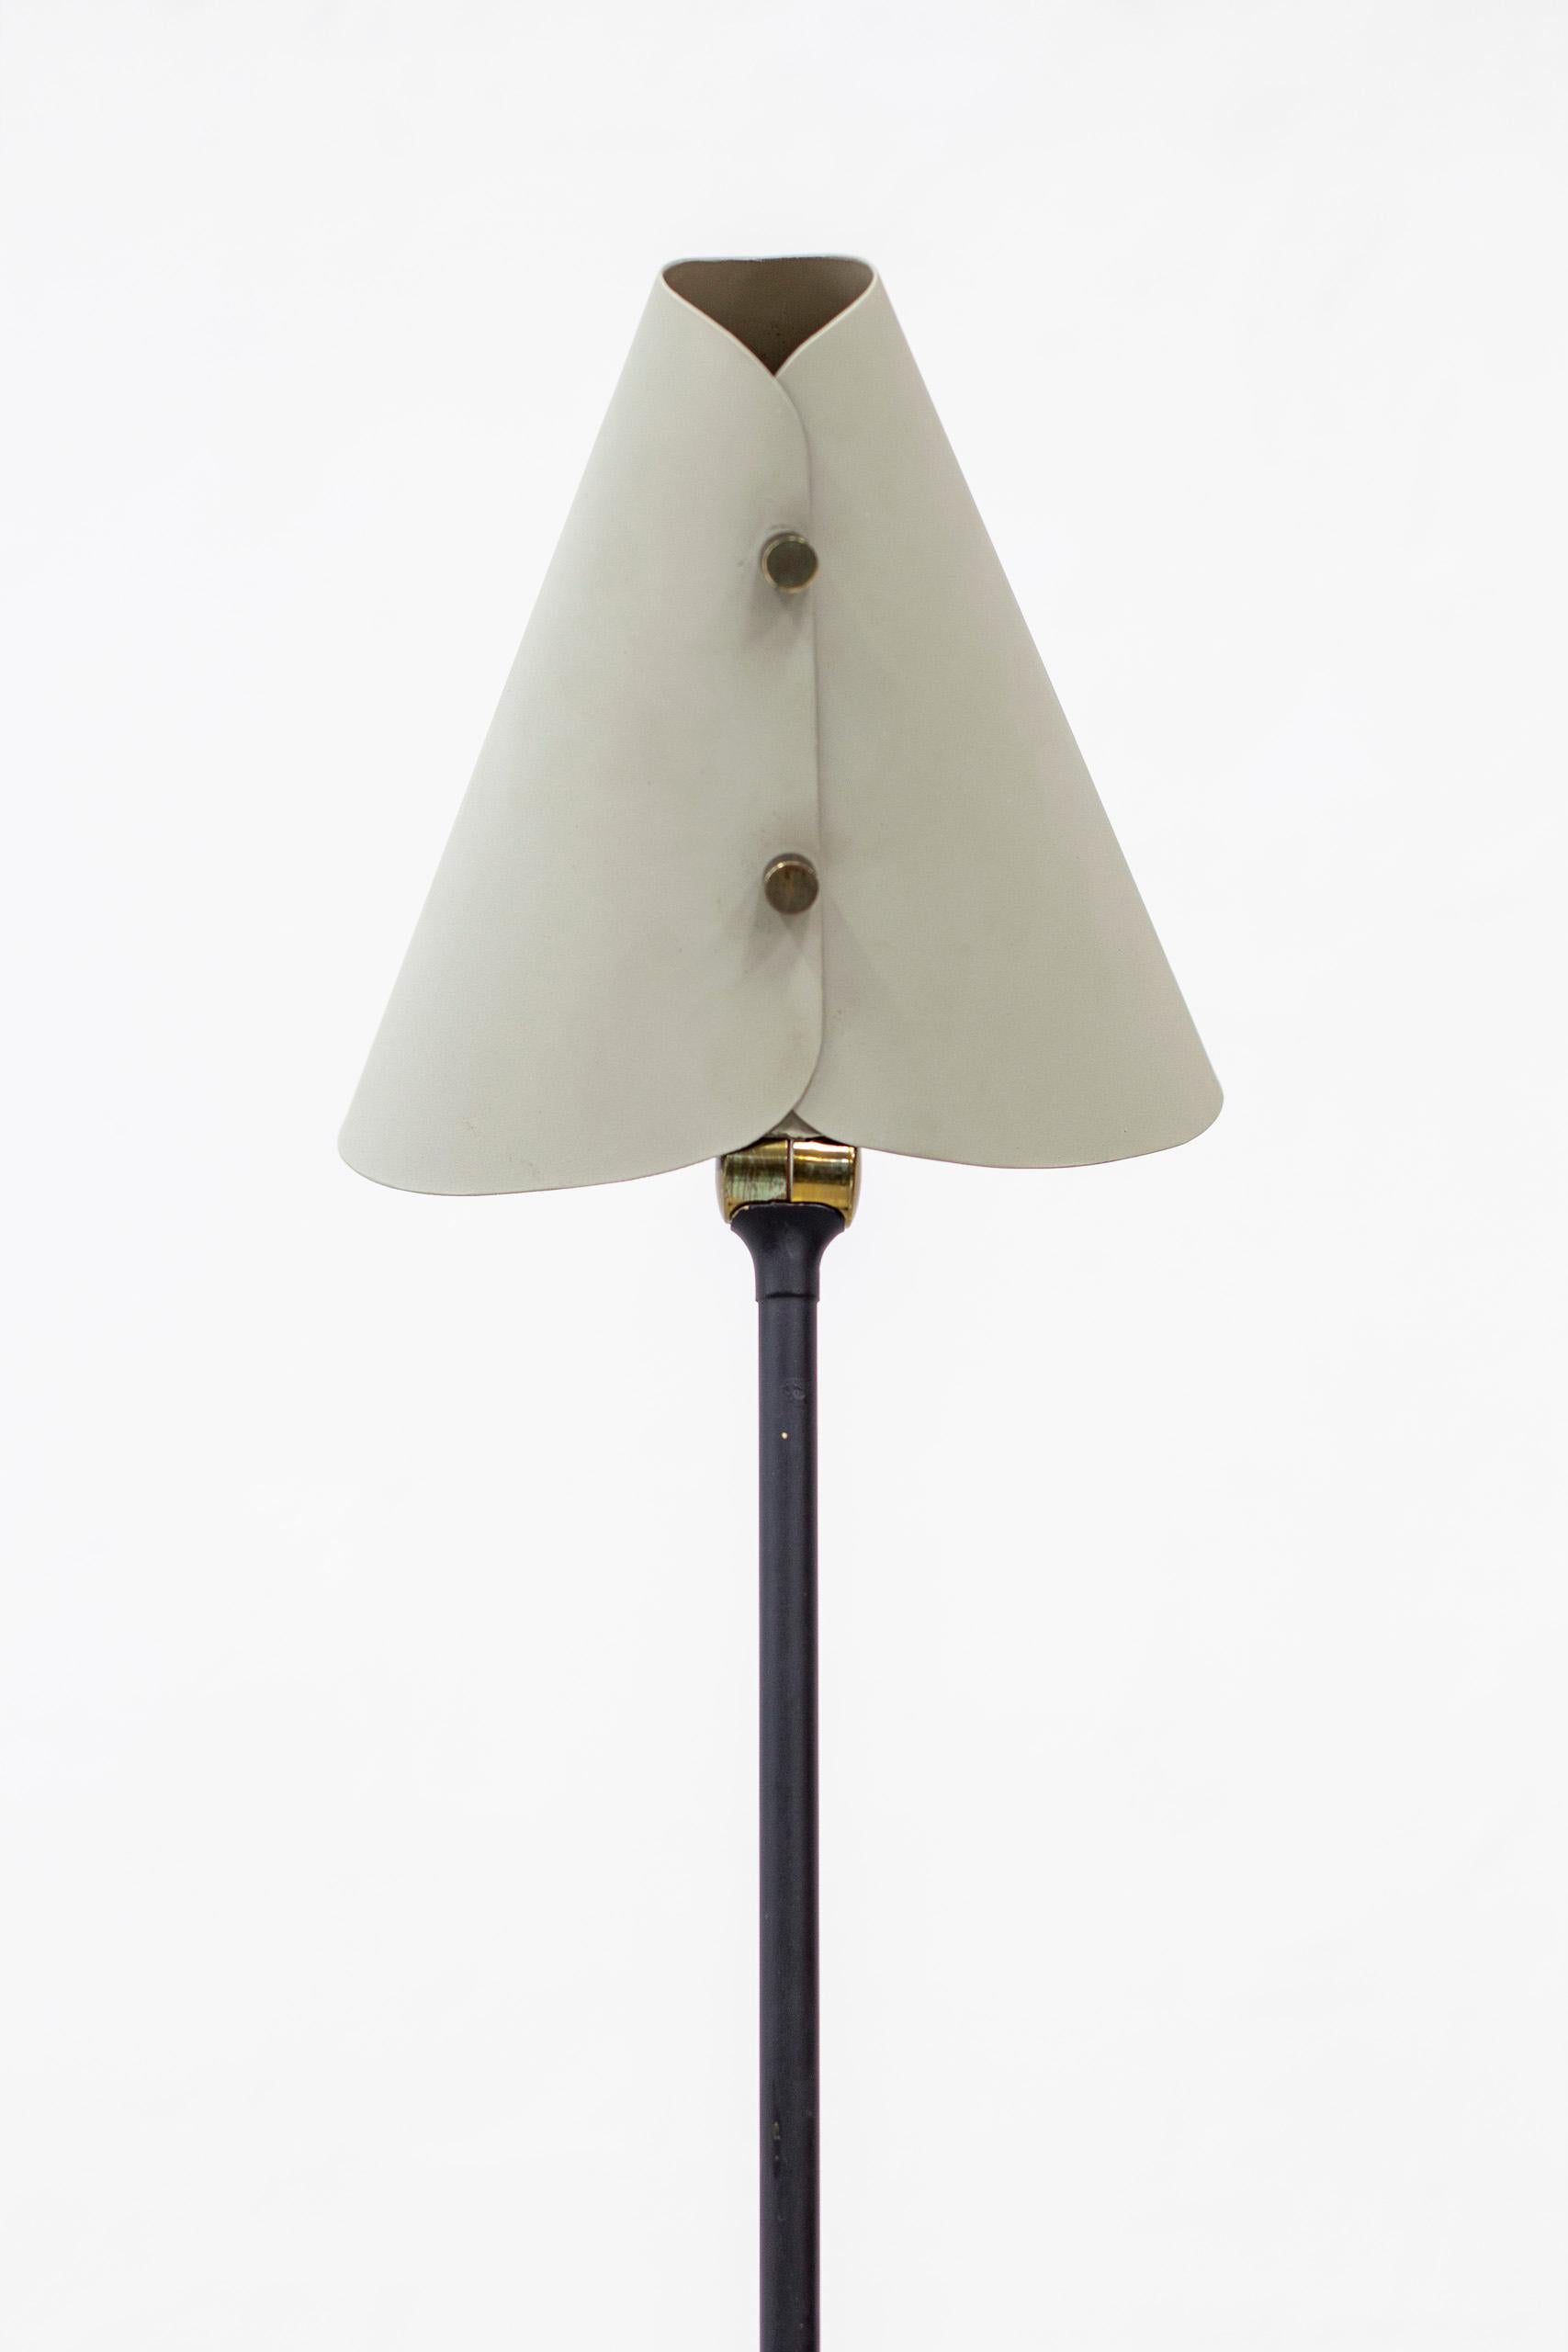 Rare and Early Floor Lamps Designed by Hans Agne Jakobsson, 1950s 3